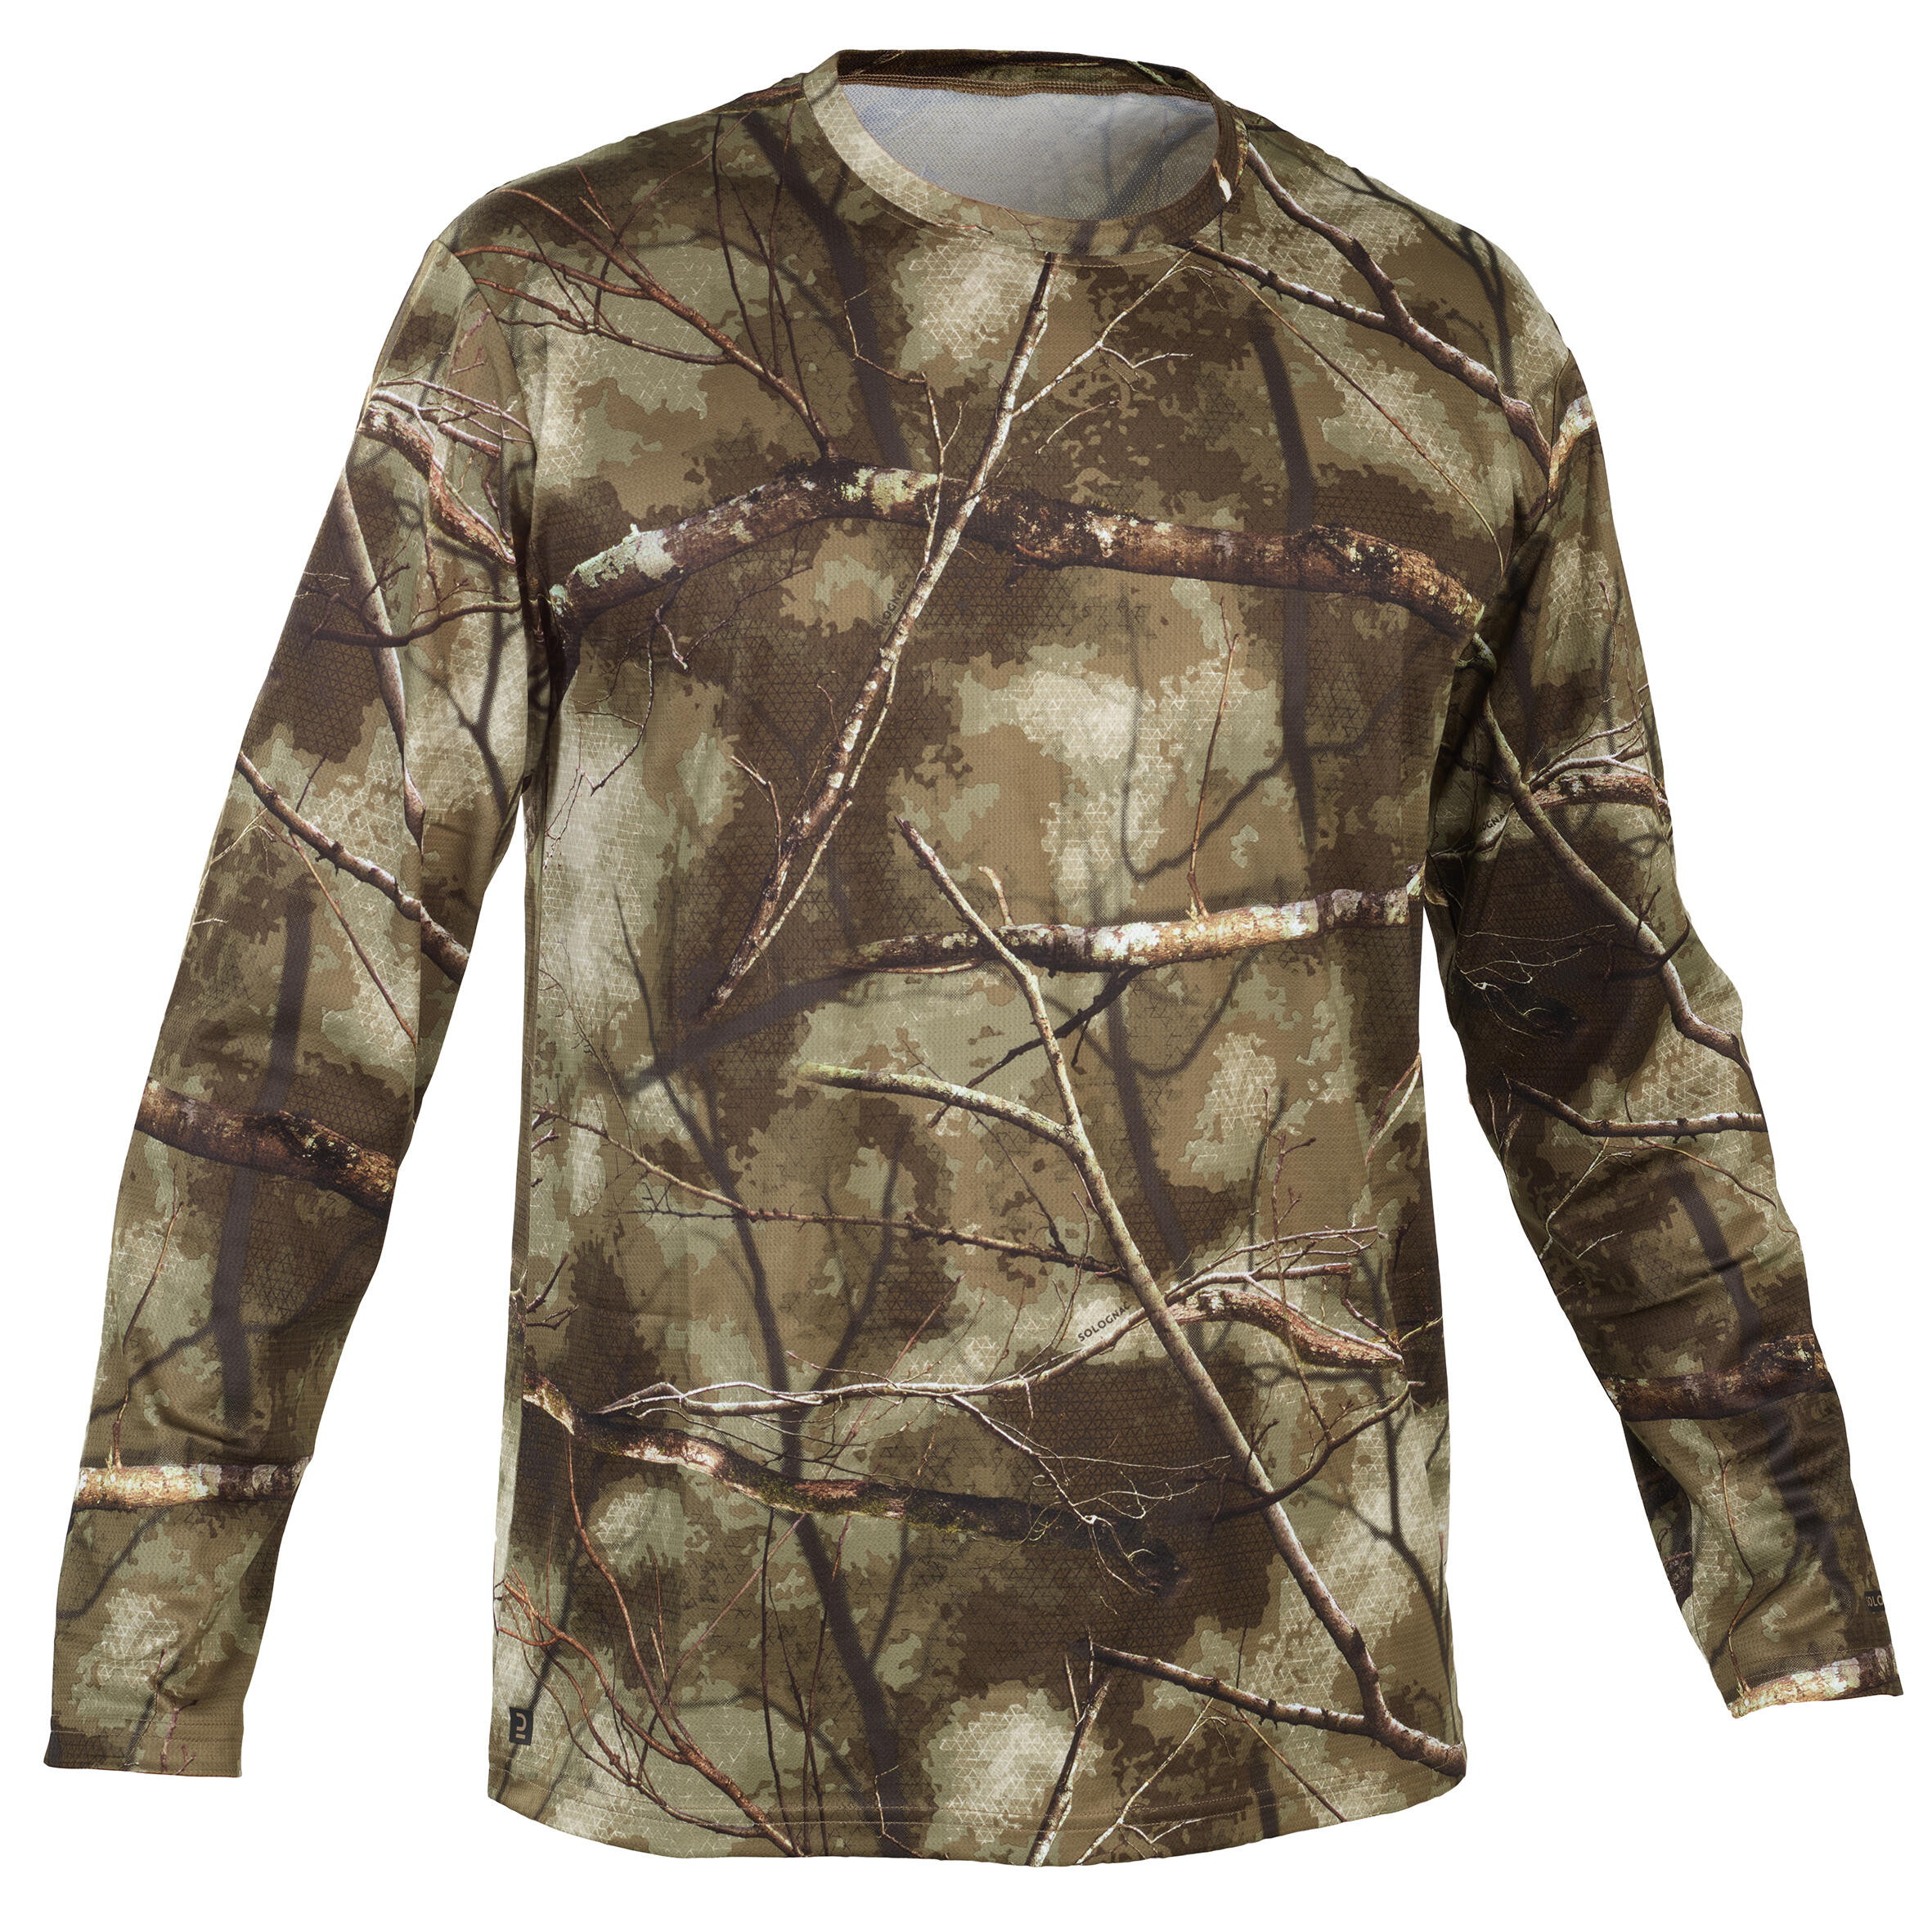 Shop Camouflage T-shirt for Outdoor Sports Online at